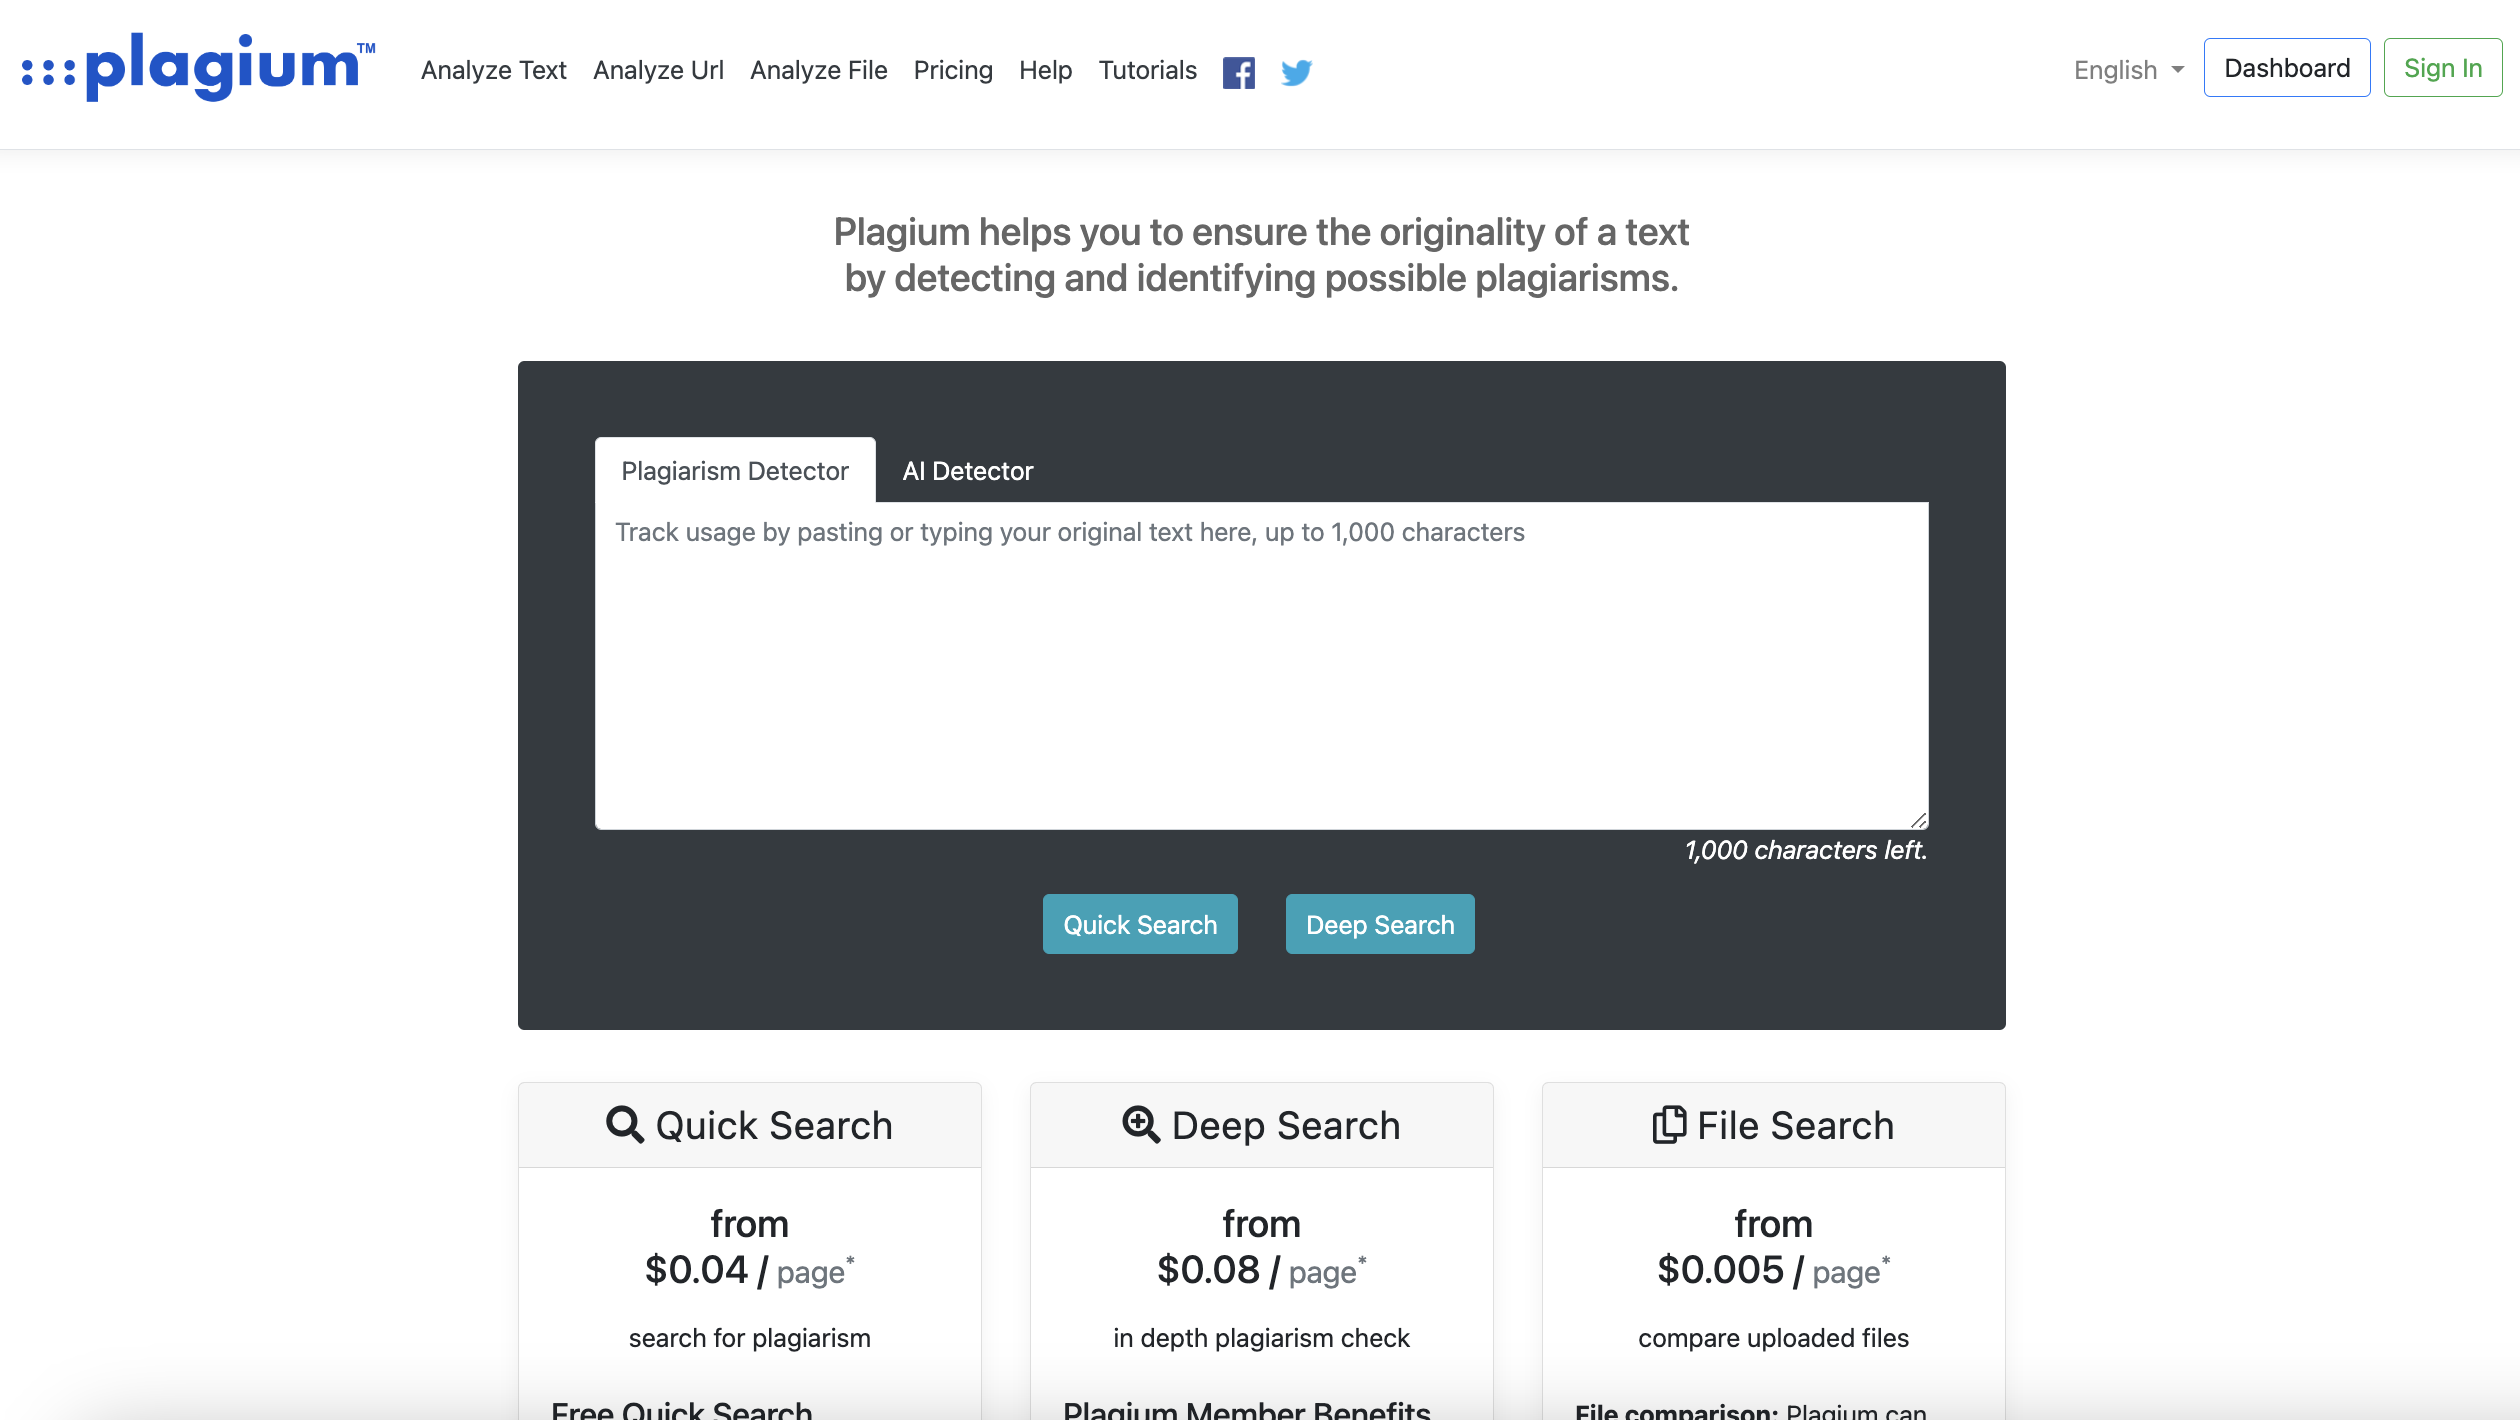 Screenshot of Plagium's plagiarism detection interface, featuring options for quick search, deep search, and file search with pricing details below. 